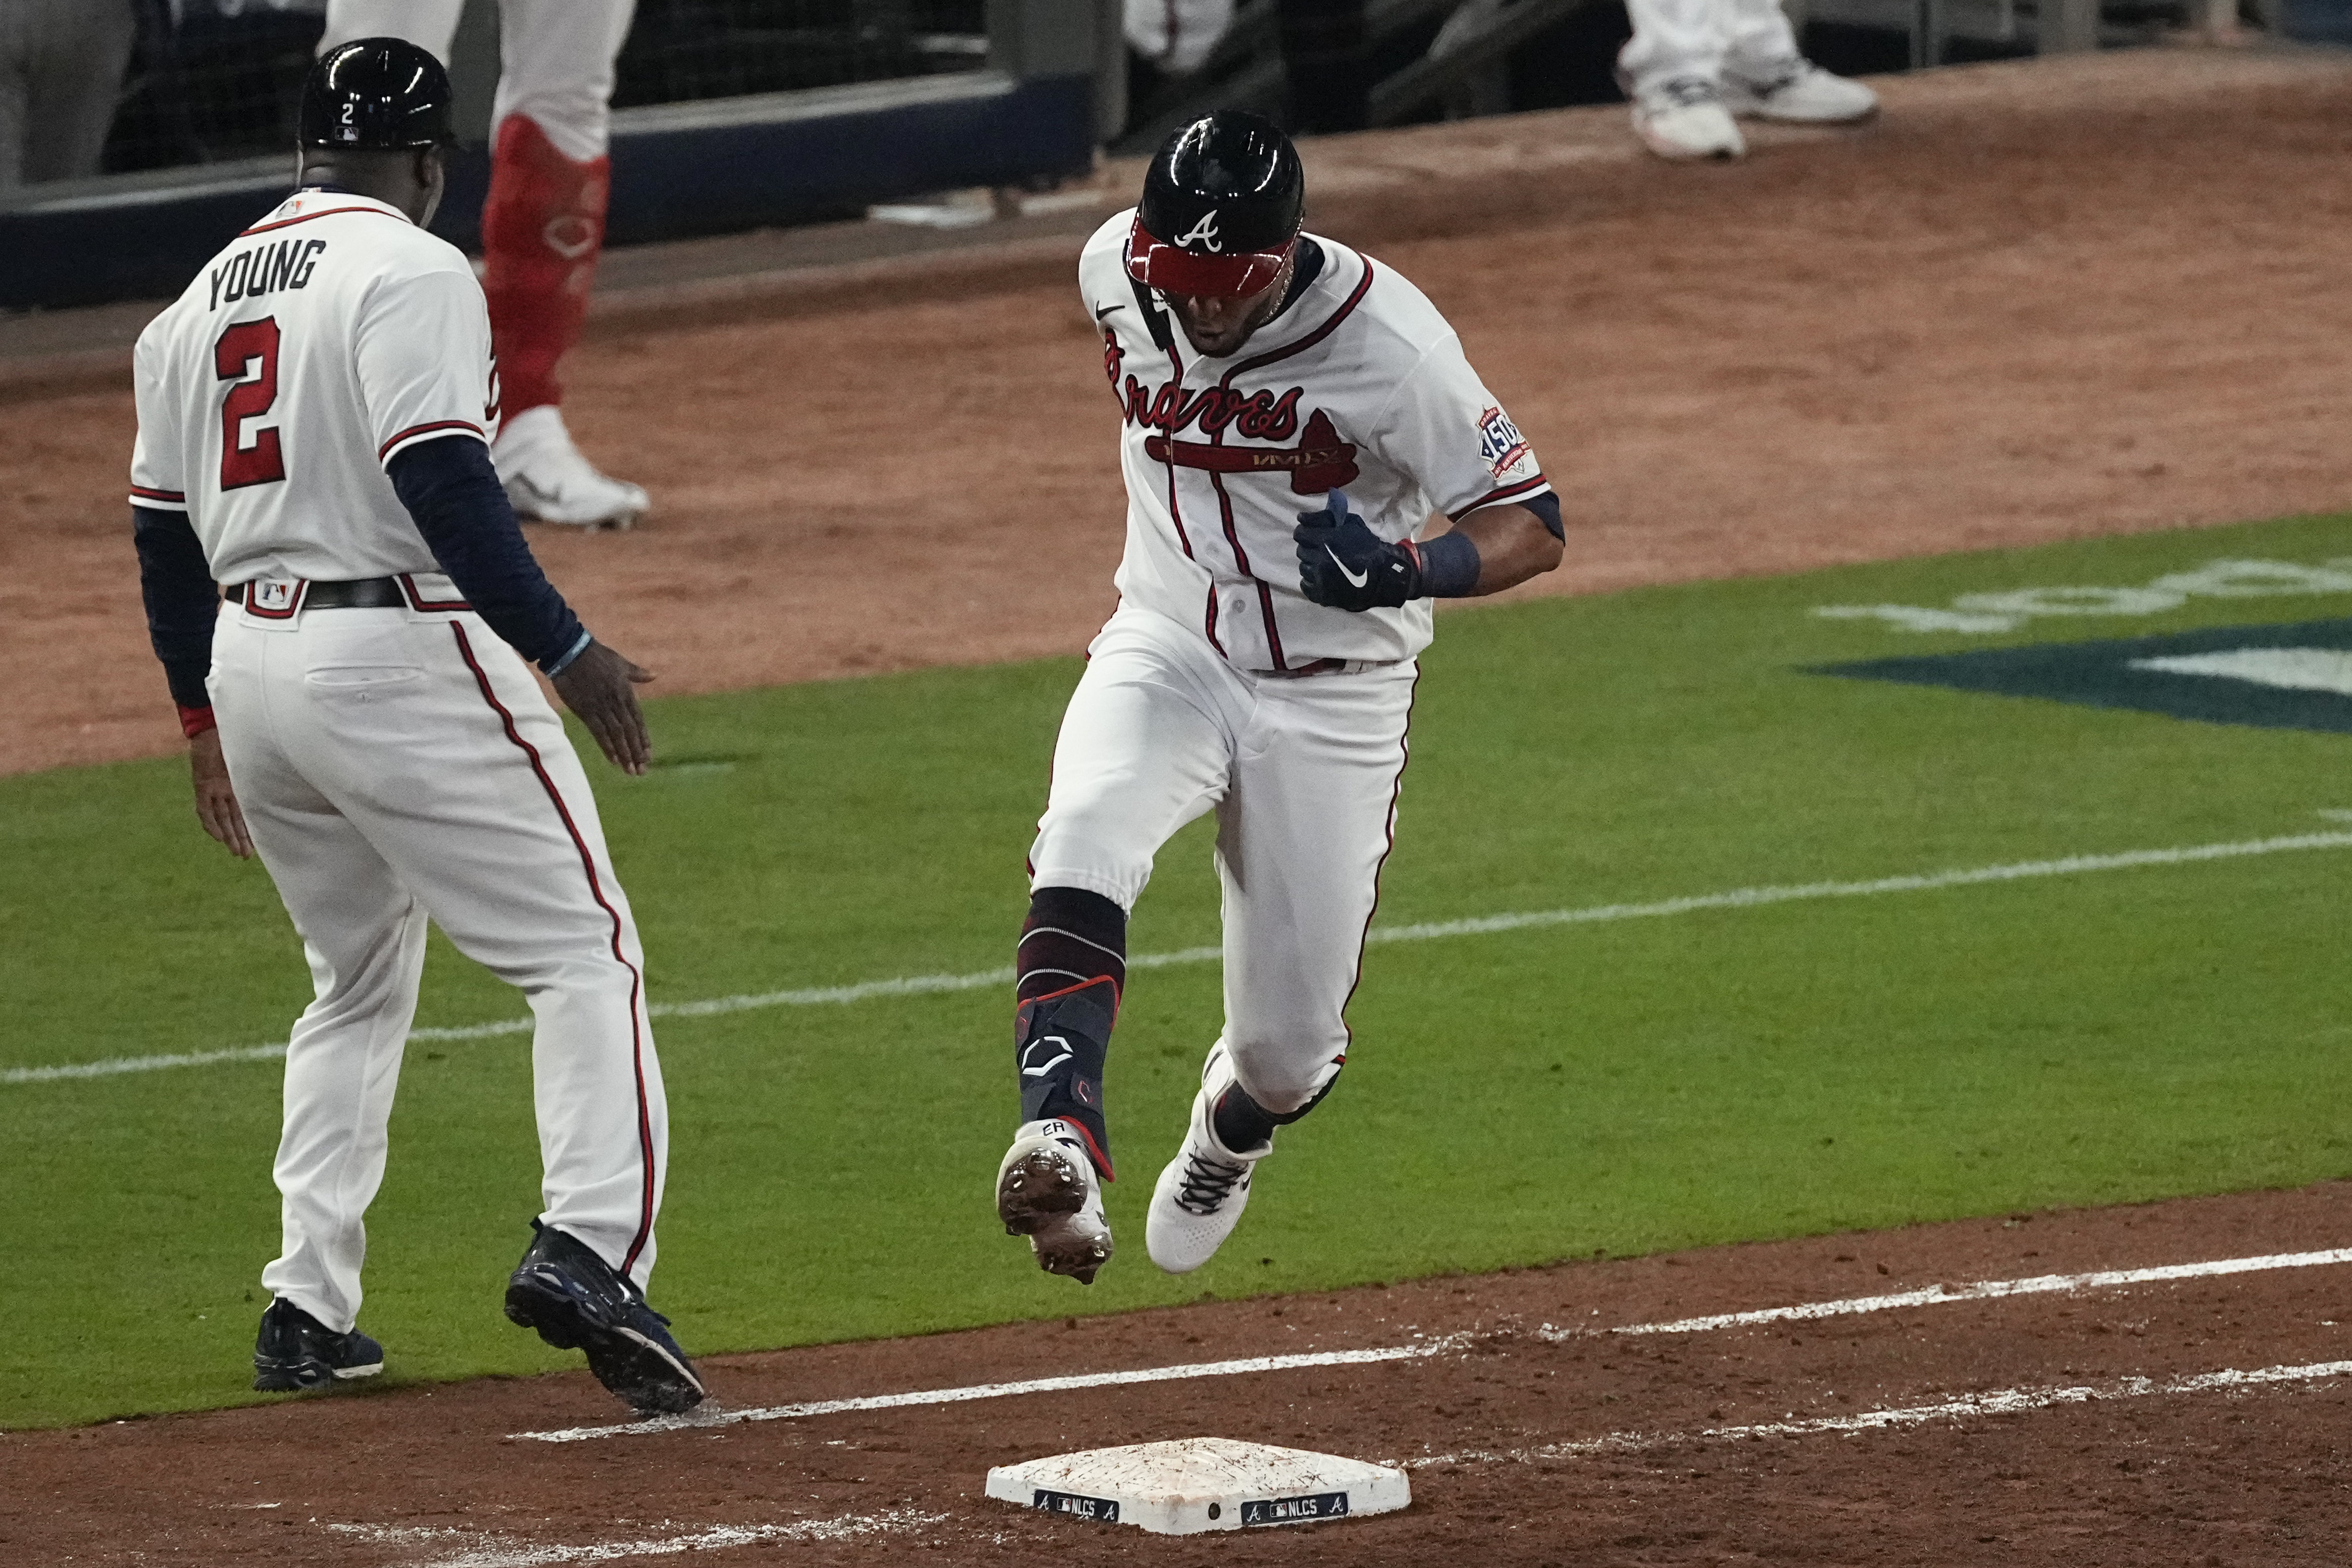 Braves' Eddie Rosario named NLCS MVP after record-tying playoff  performance, go-ahead Game 6 homer 